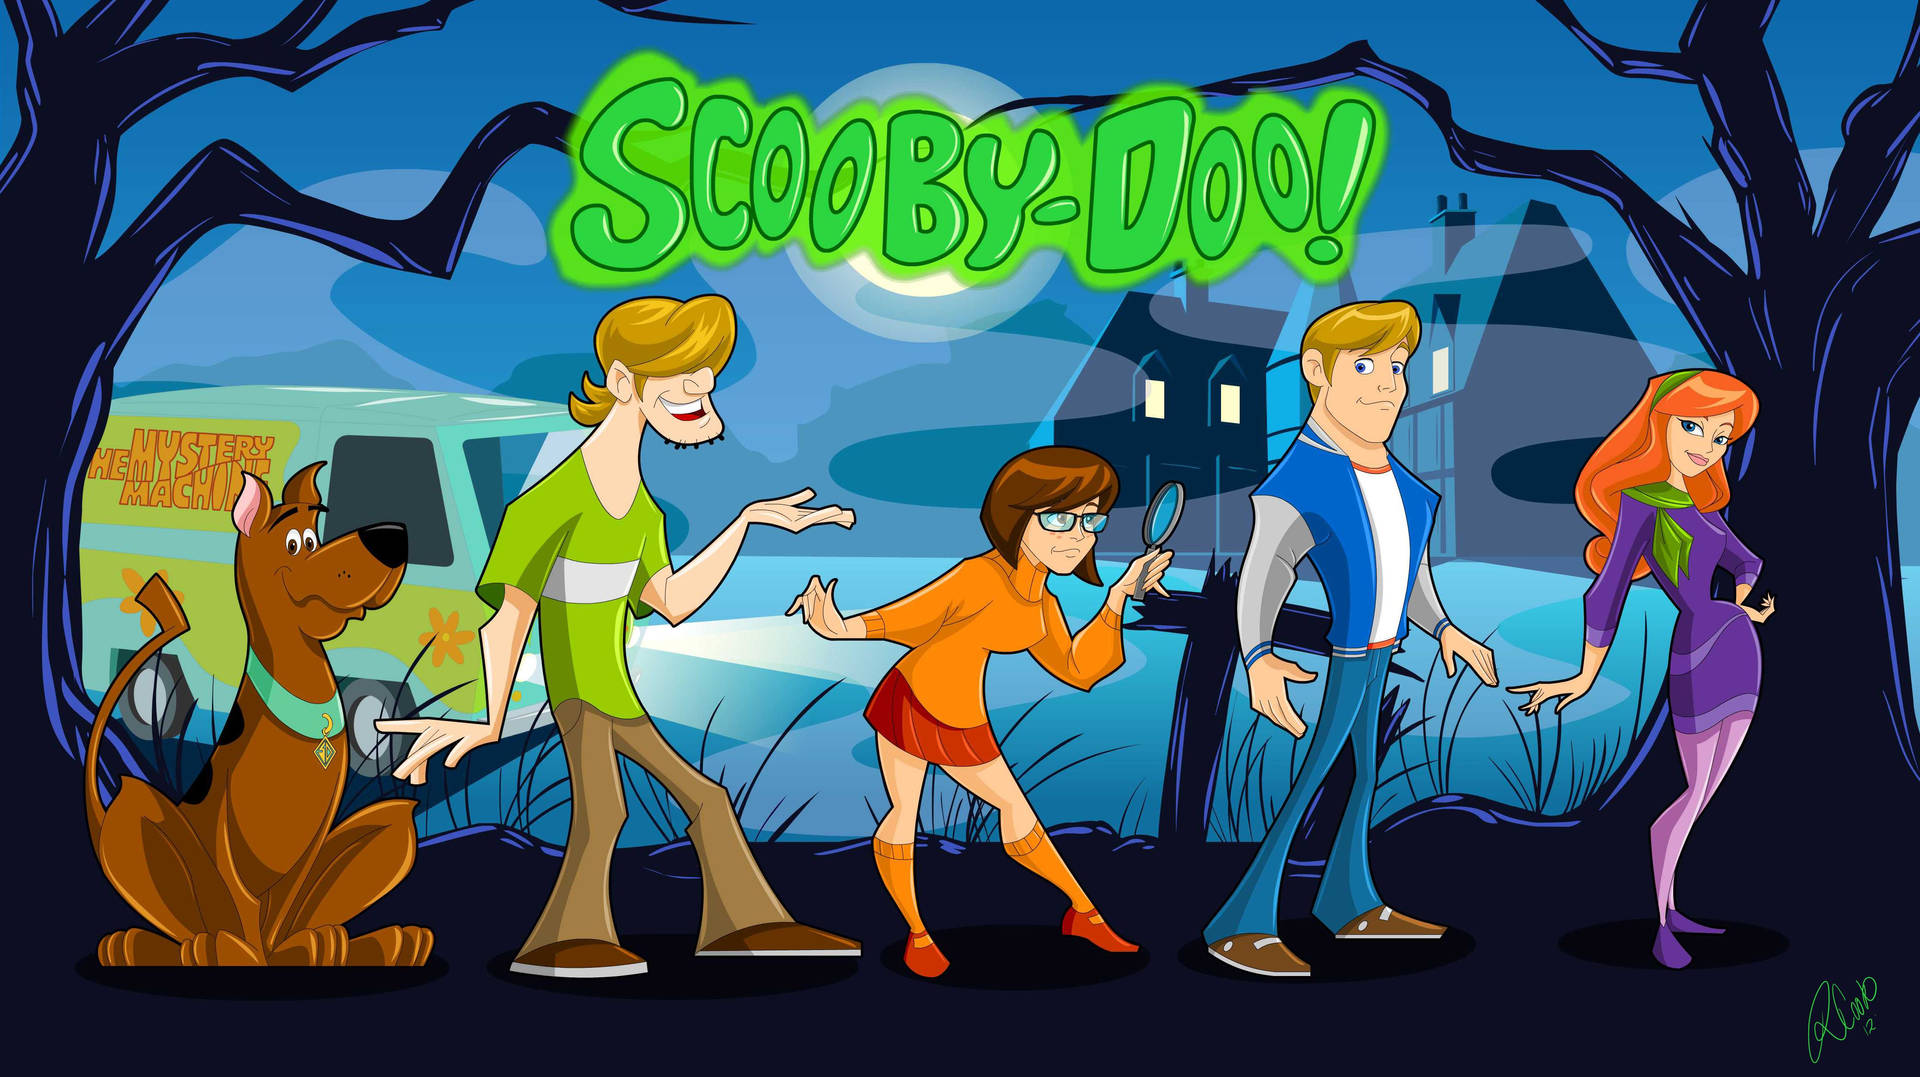 Awesome Scooby Doo iPhone Wallpapers  WallpaperAccess  Scooby doo images Scooby  doo Scooby